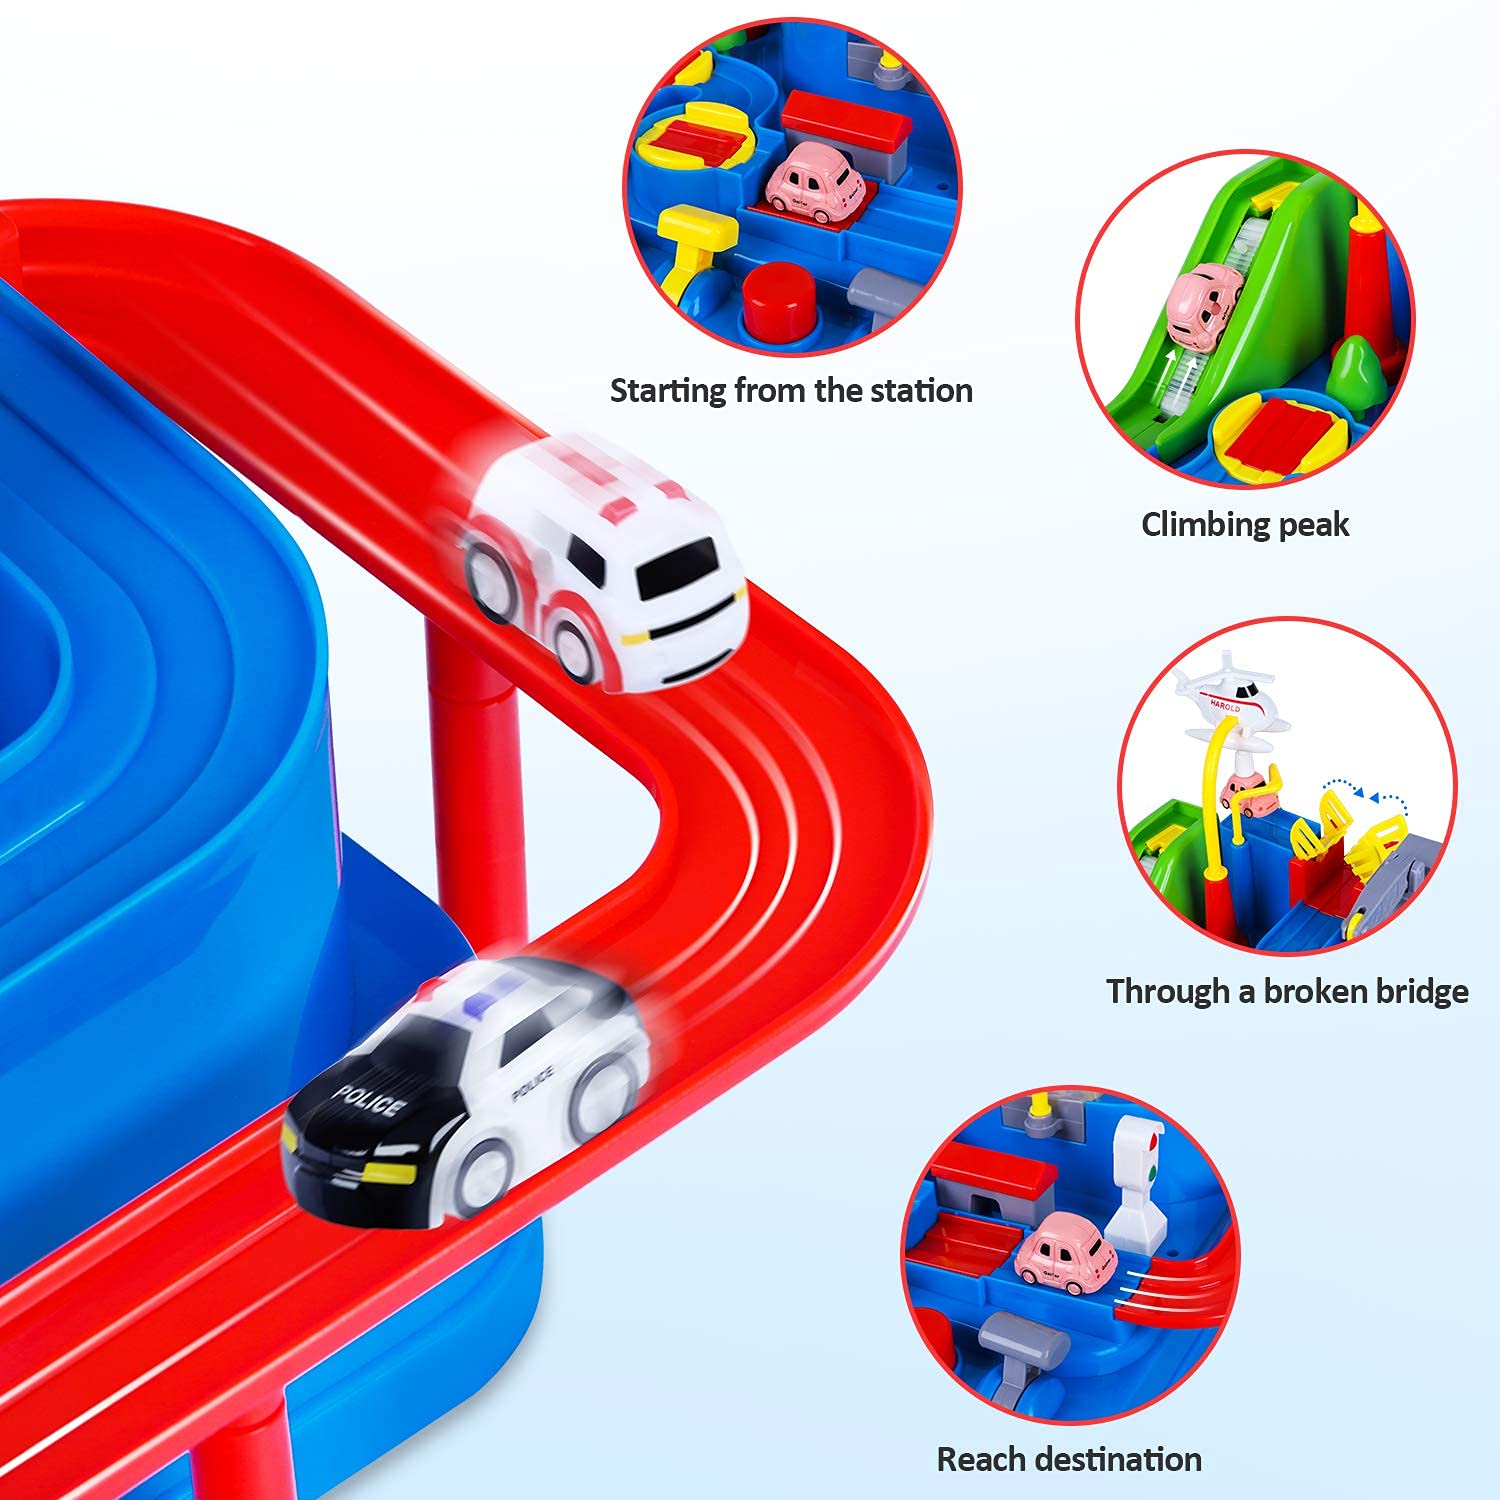 Yezi Car Adventure Toys, City Rescue Preschool Educational Toy Vehicle, Parent-Child Interactive Racing Kids Toy, Puzzle Car Race Tracks Parking Playsets for 3 4 5 6 7 8 Year Old Toddlers Boys Girls